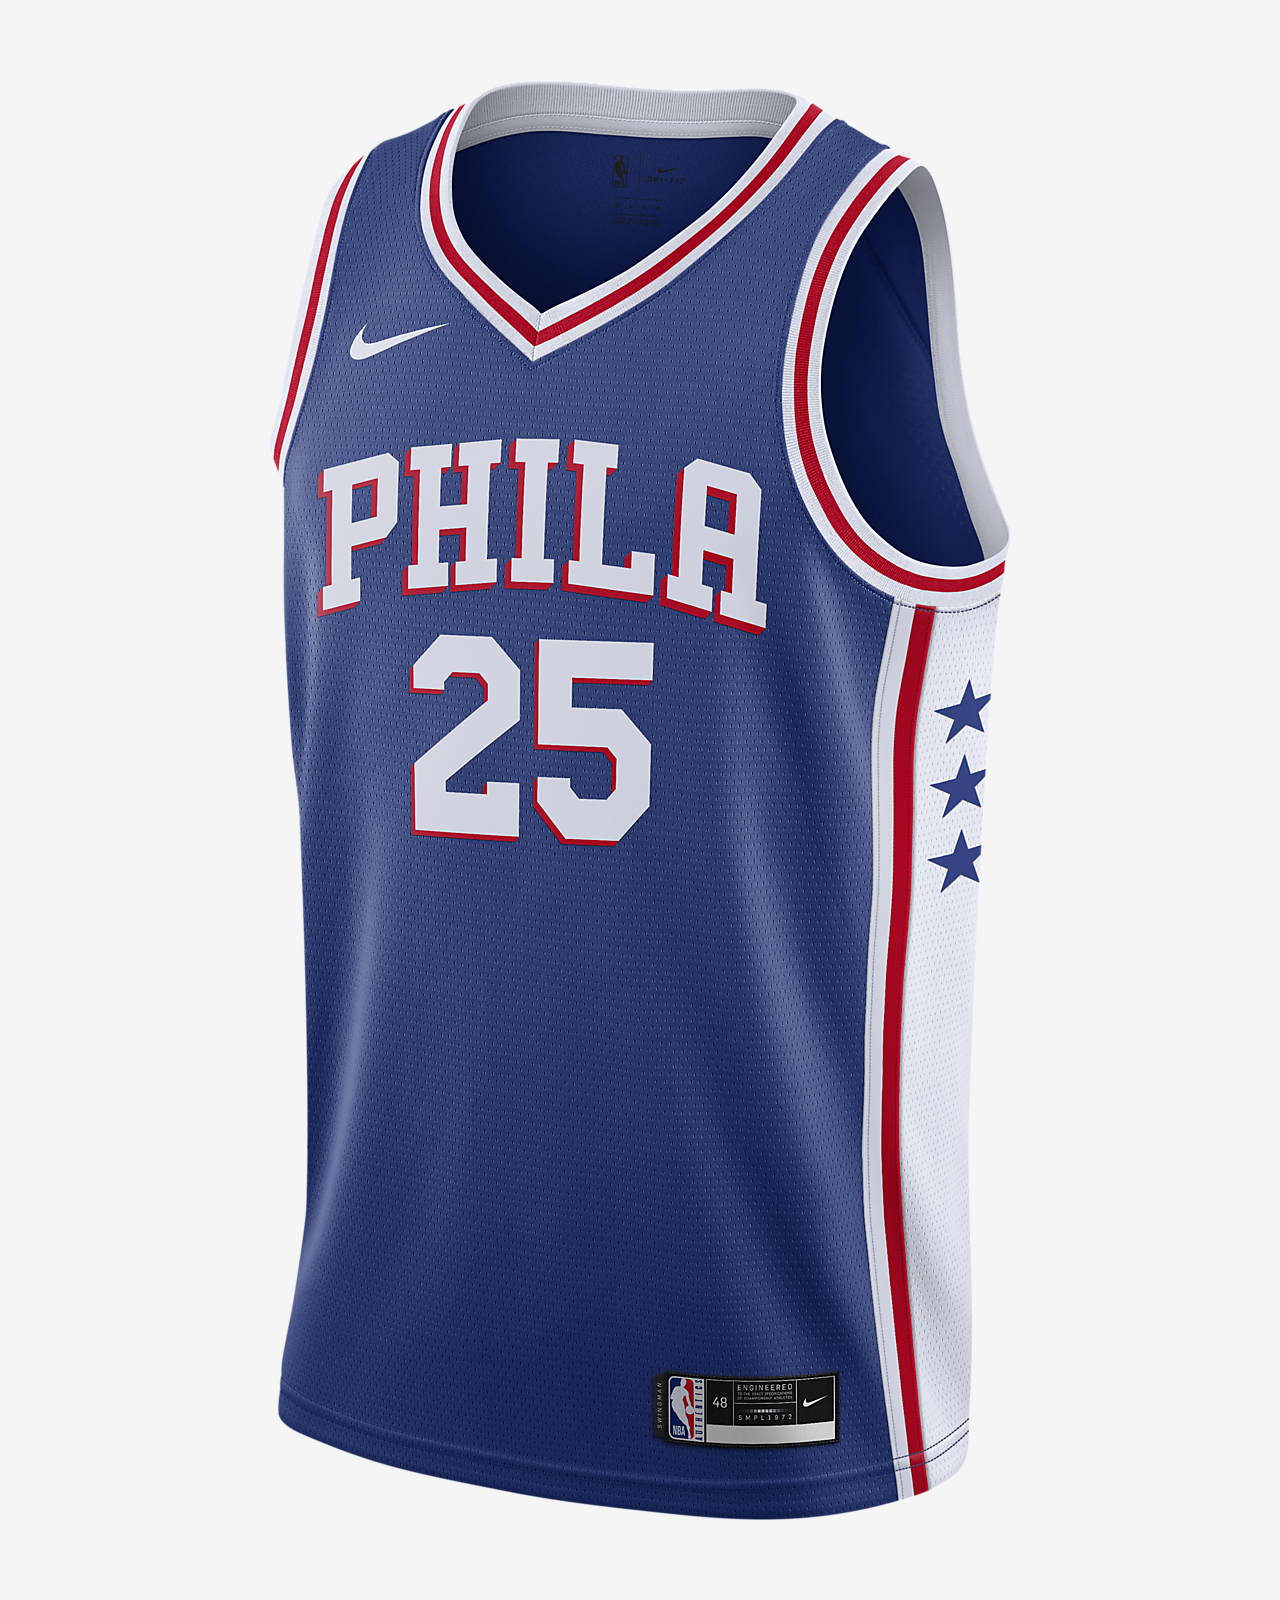 sixers jersey colors